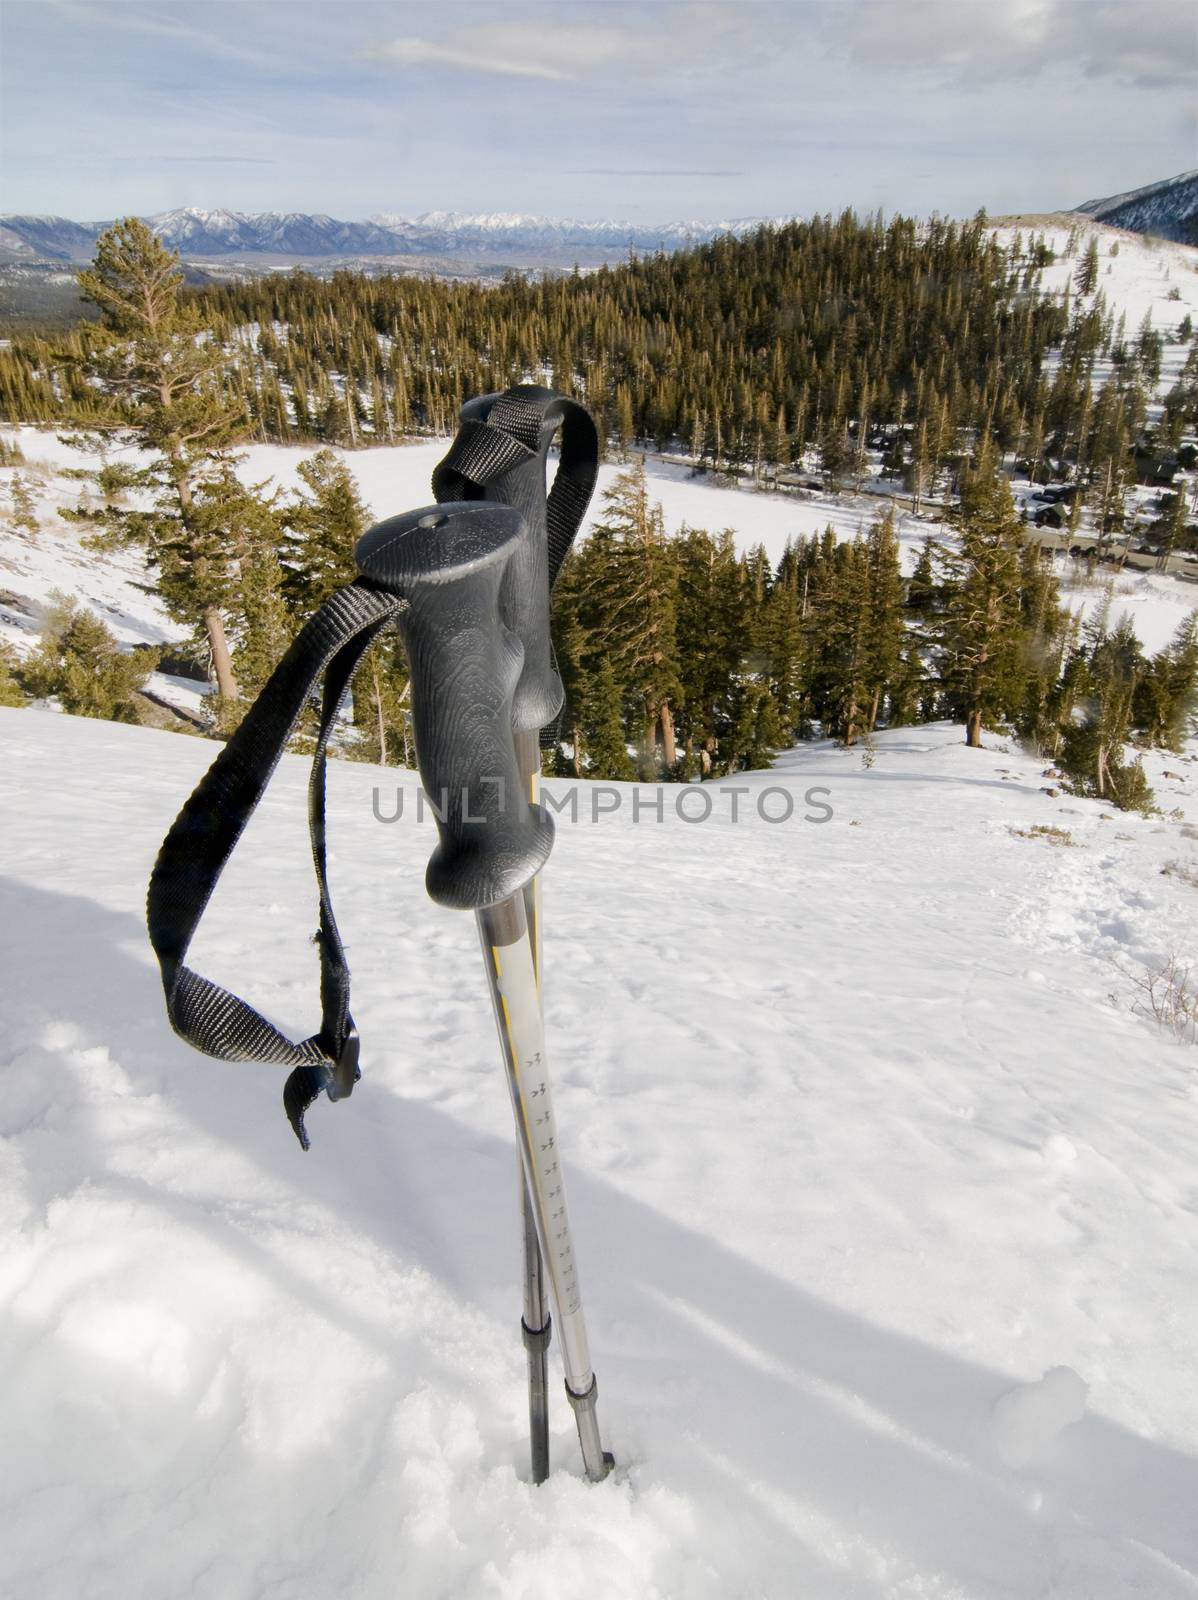 Trekking poles in the snow in Mammoth Lakes, CA by Njean